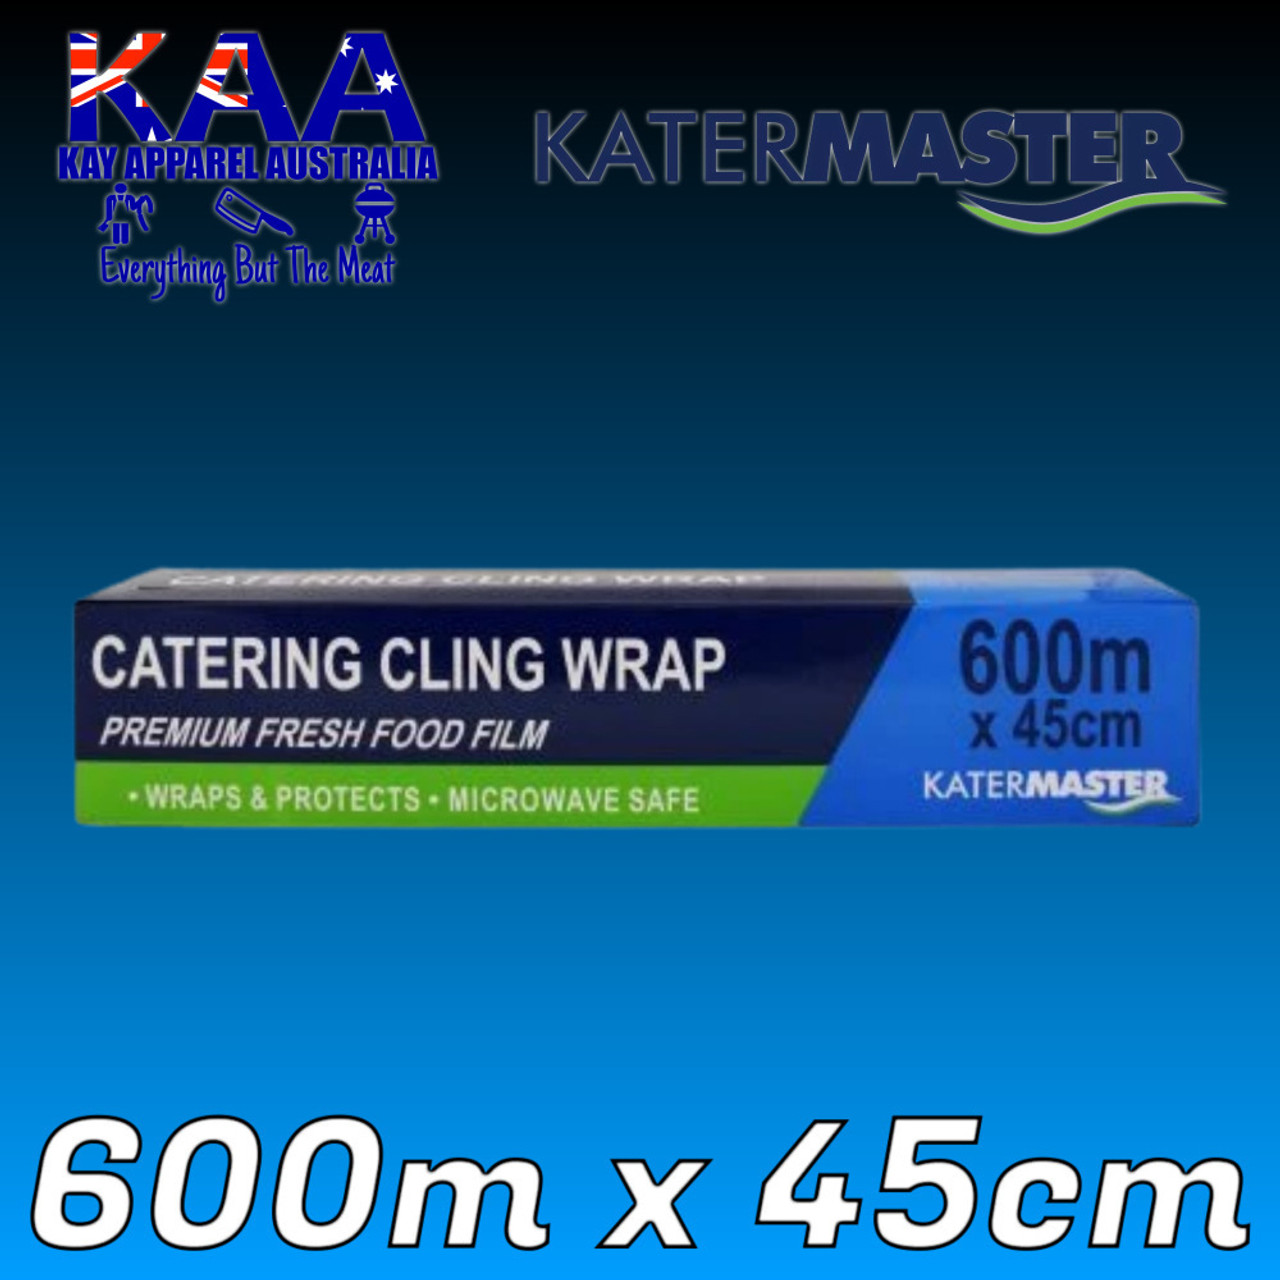 https://cdn11.bigcommerce.com/s-uyjg7n24jh/images/stencil/1280x1280/products/4205/9740/Katermaster_Cling_Wrap_45cm_X_600m__46644.1698366909.jpg?c=2